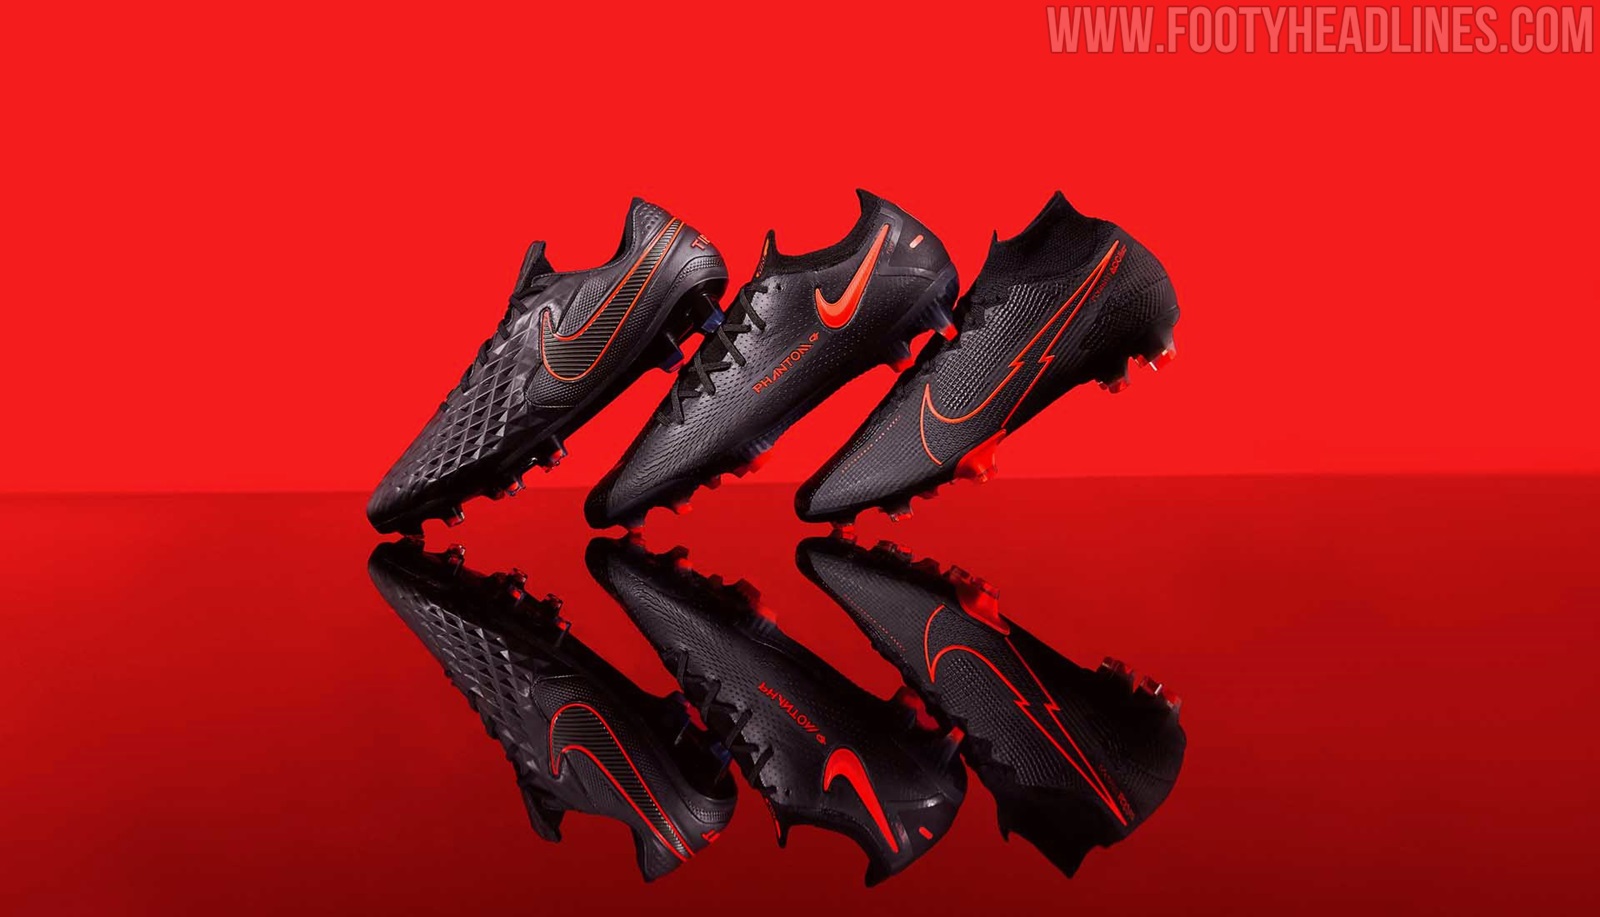 Nike Black x Chile Red 2020-21 Pack' Boots Released - Headlines